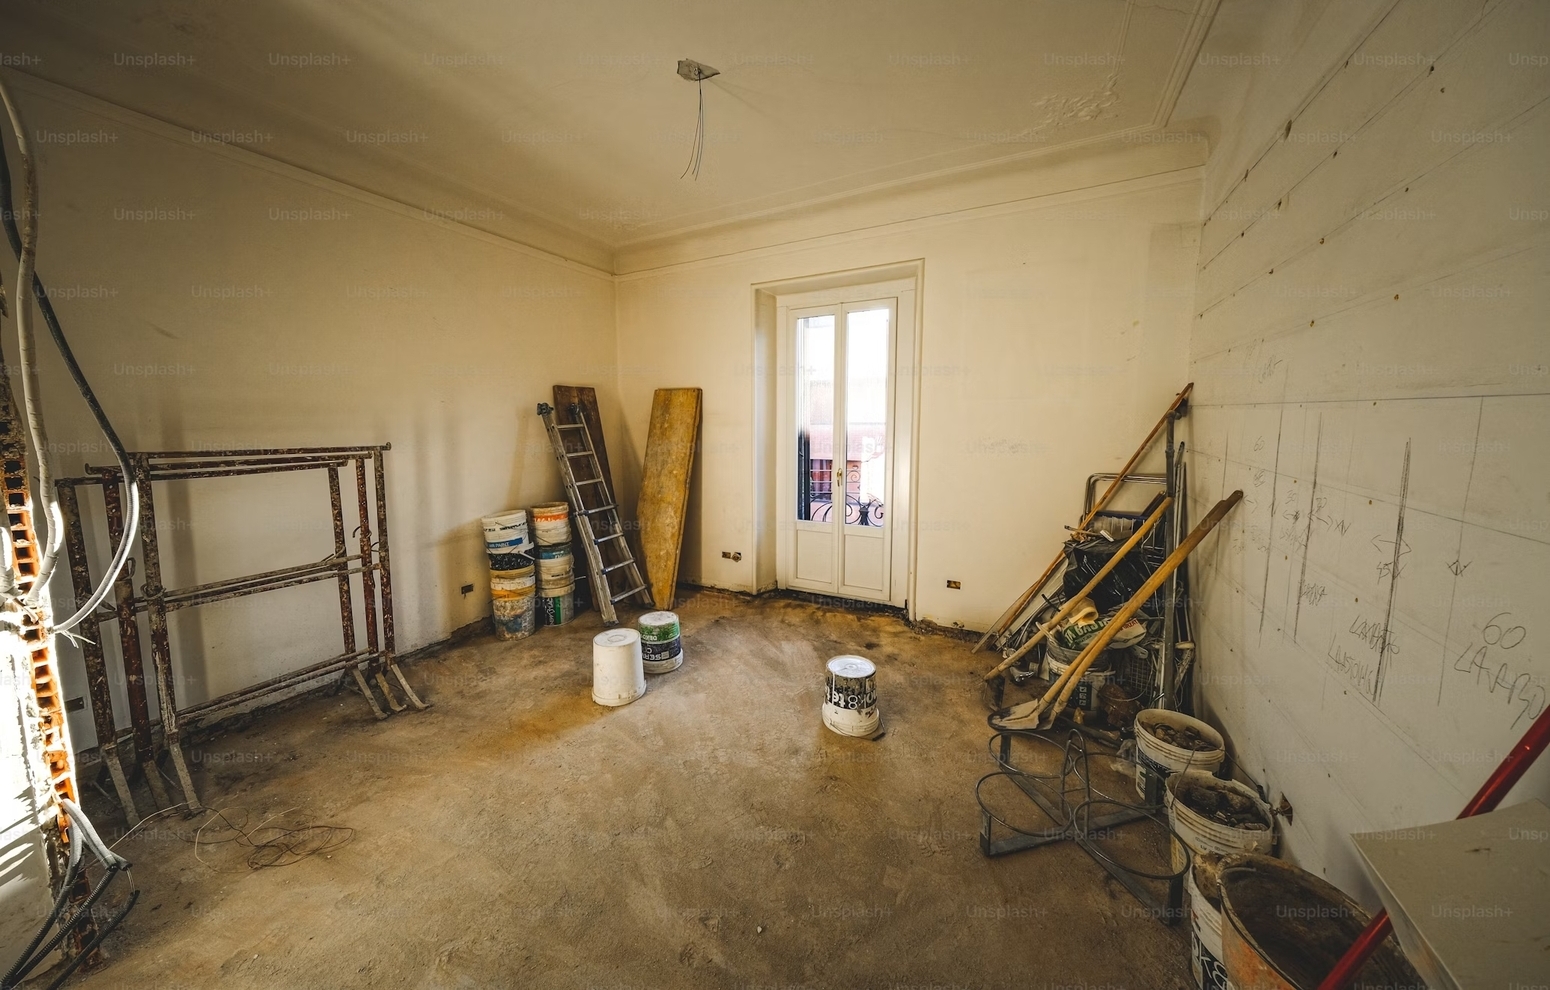 Adequacy for private property renovations